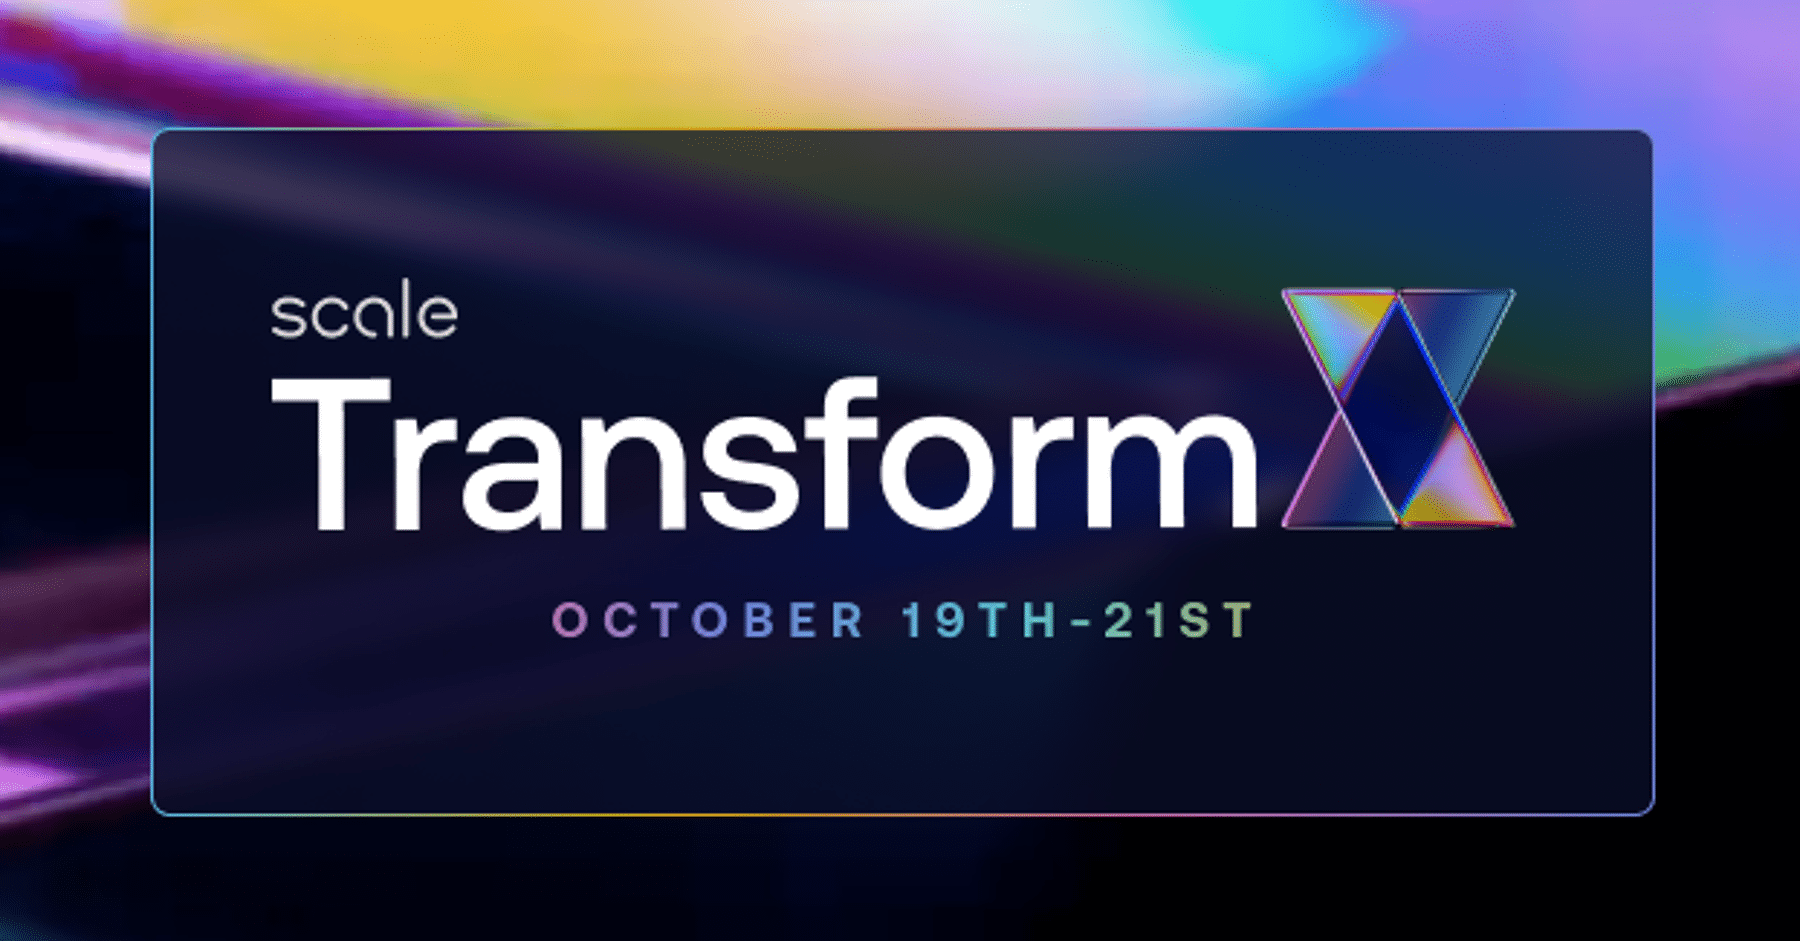 TransformX Conference: Operationalizing AI at Scale